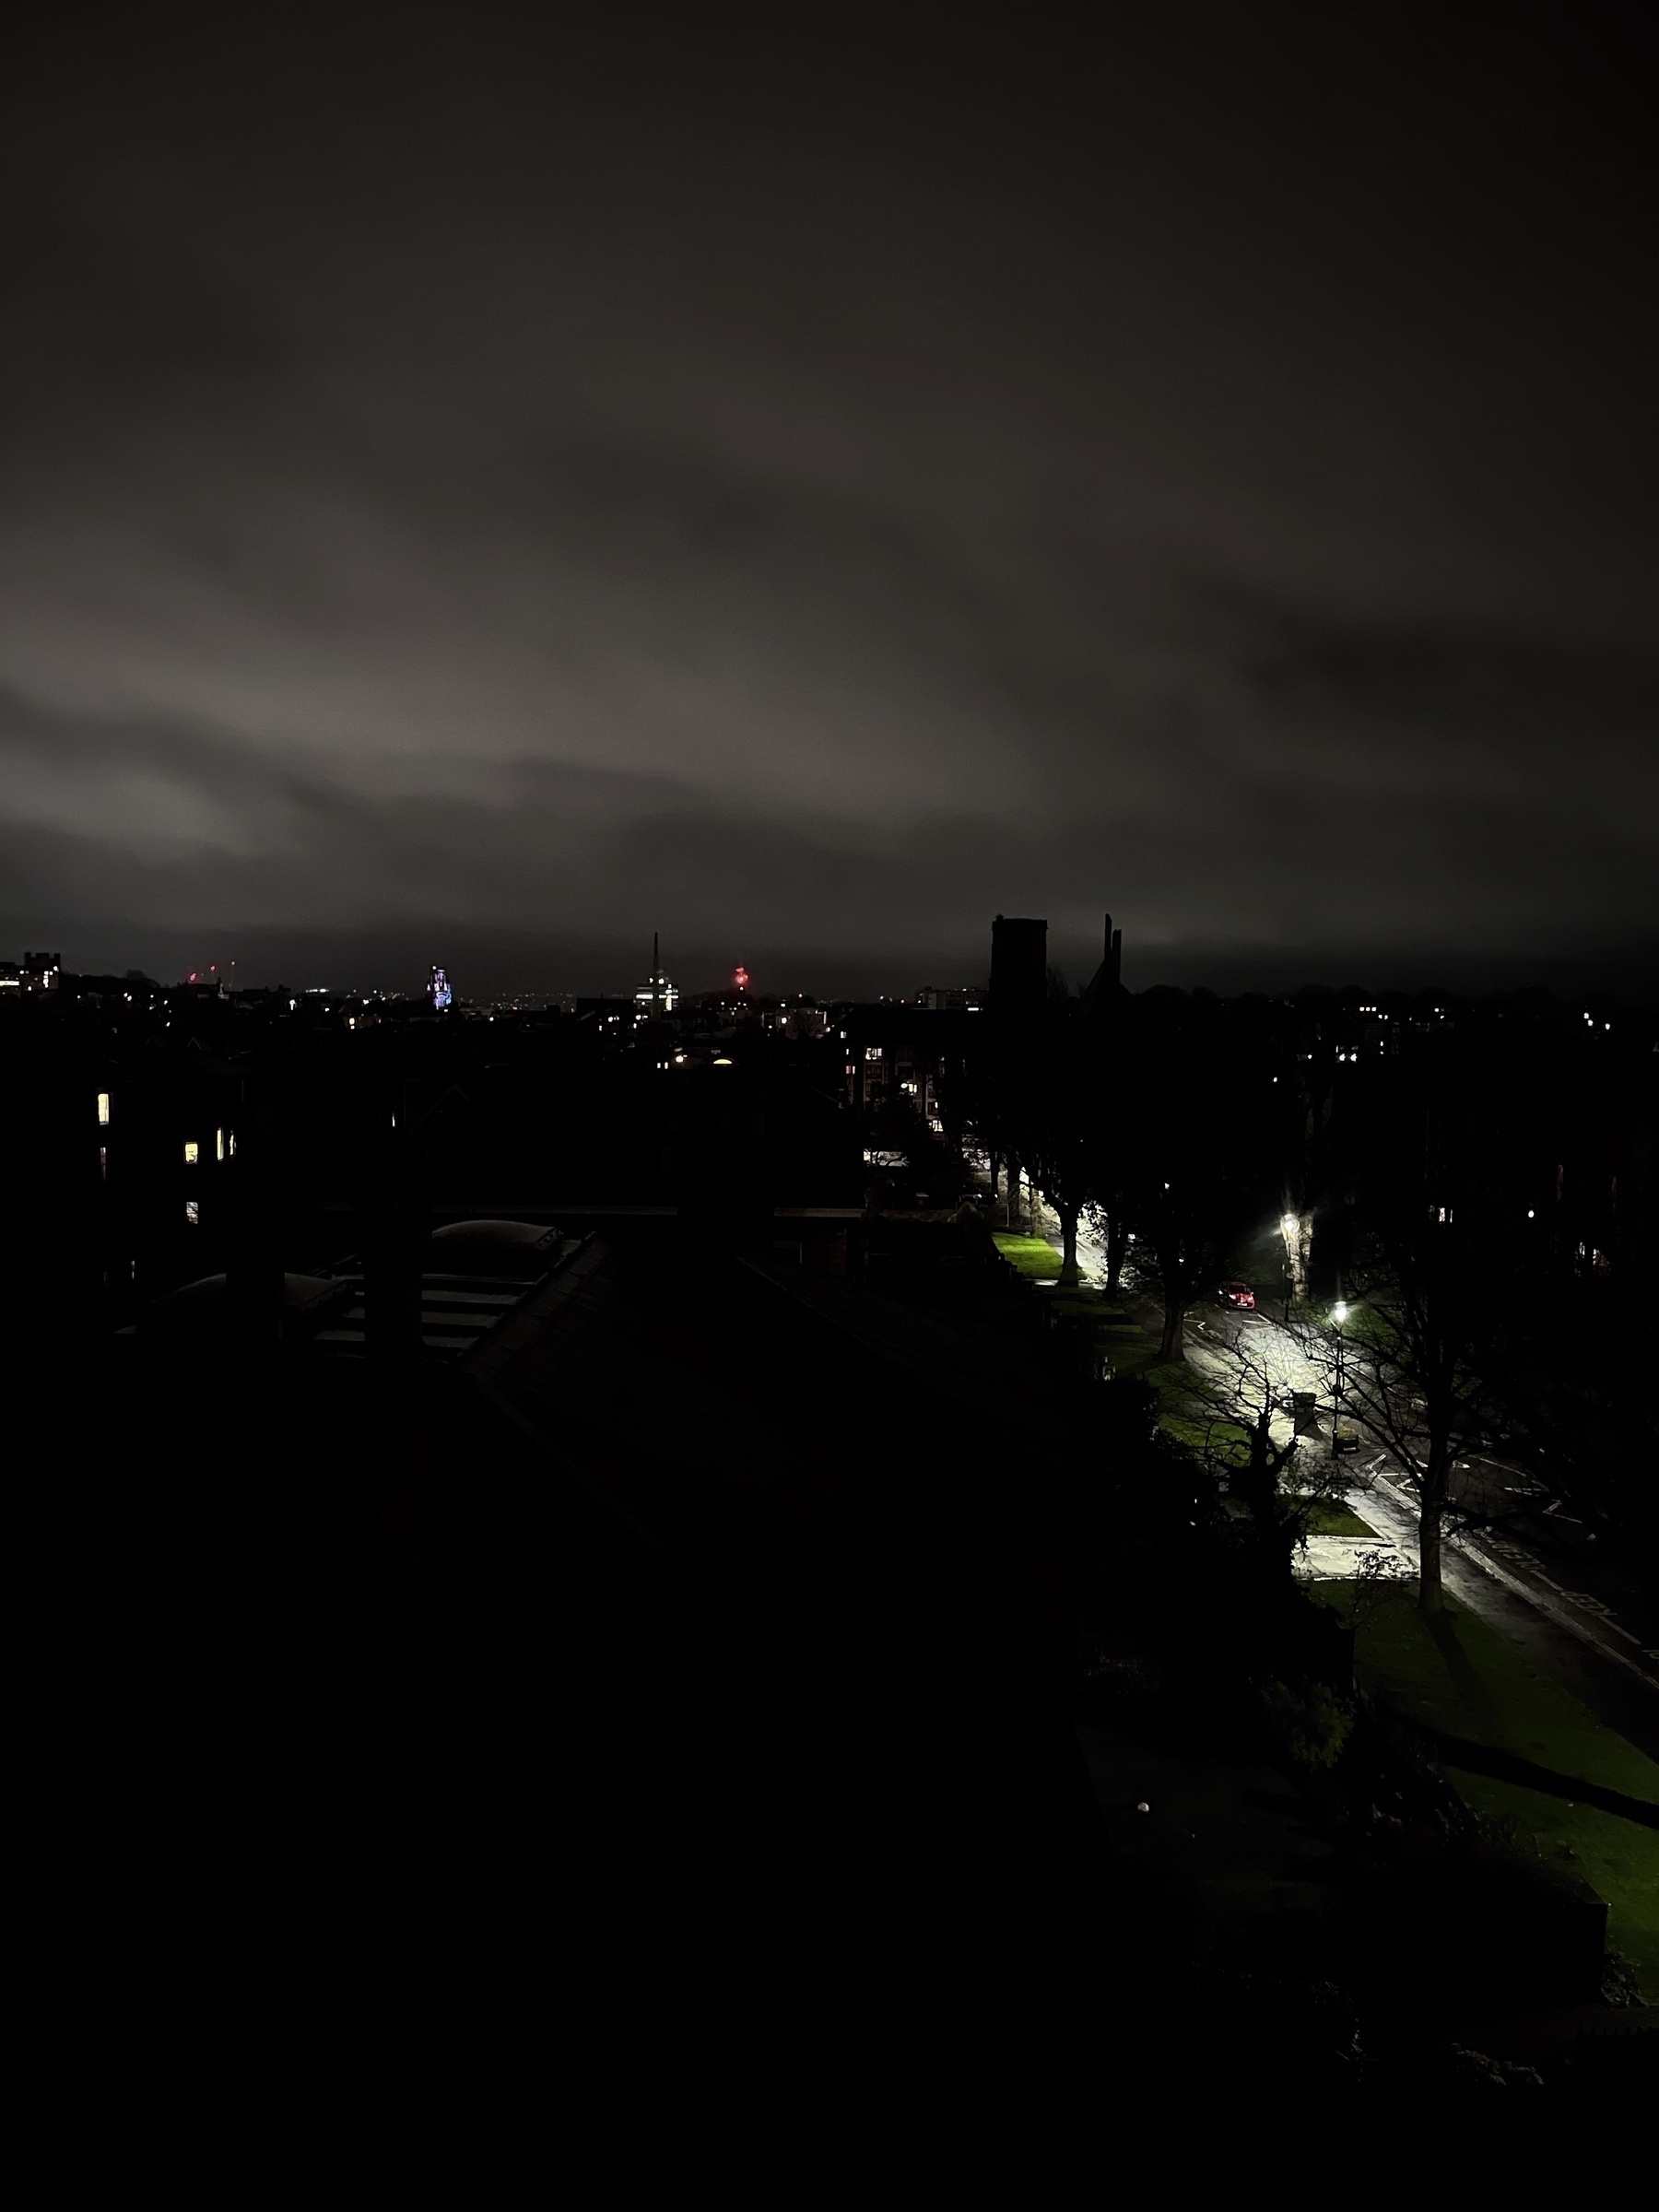 Looking out over the city of Bristol at nighttime